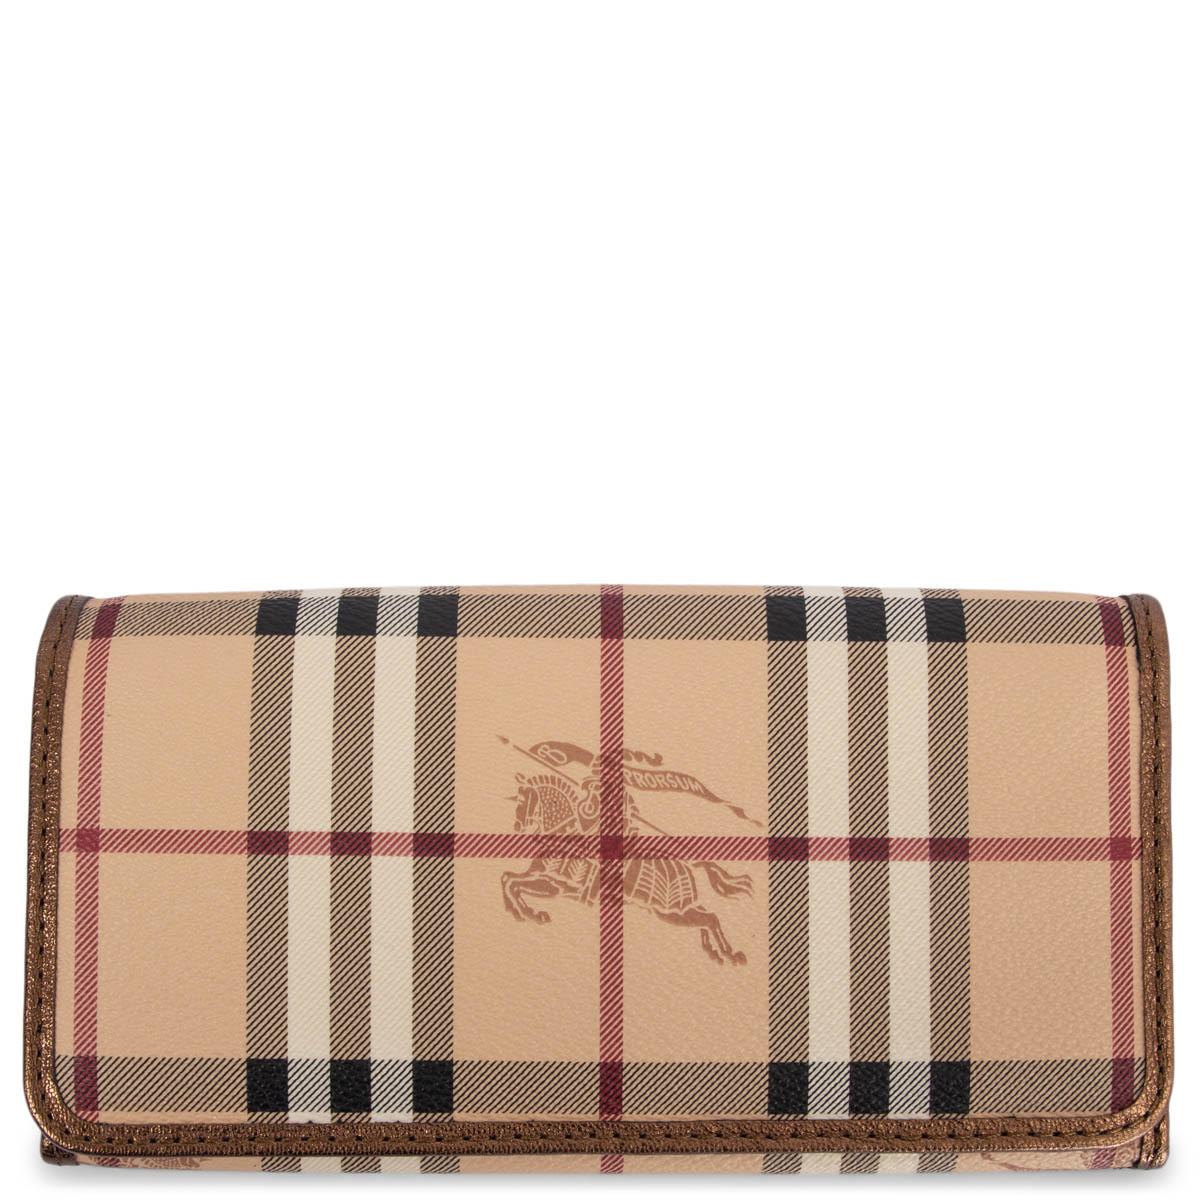 Burberry Brown/Black Monogram Coated Canvas TB Compact Wallet